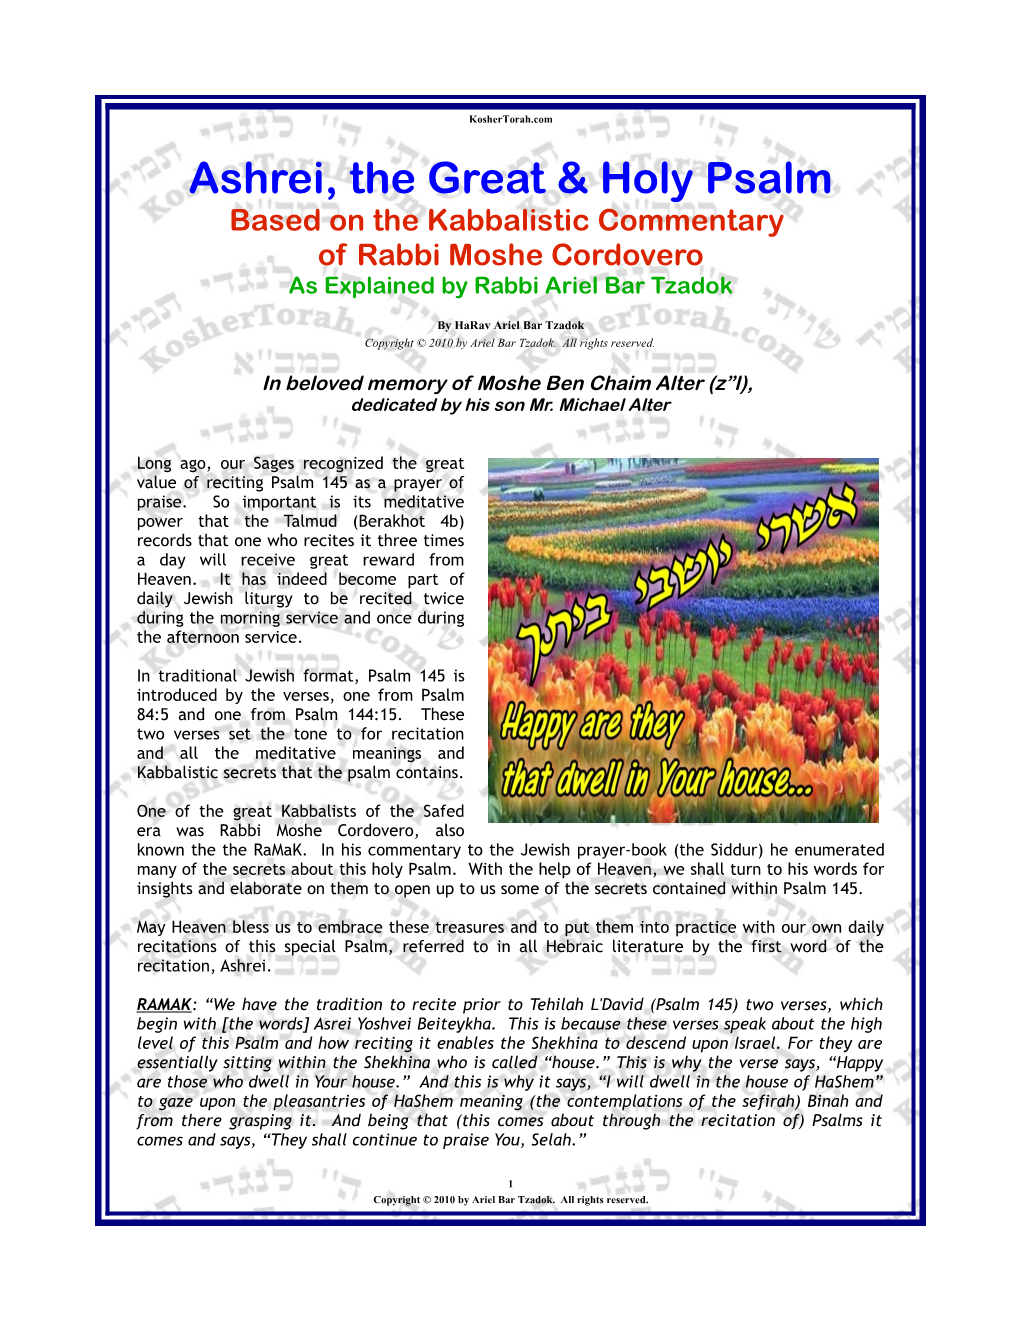 Ashrei, the Great & Holy Psalm